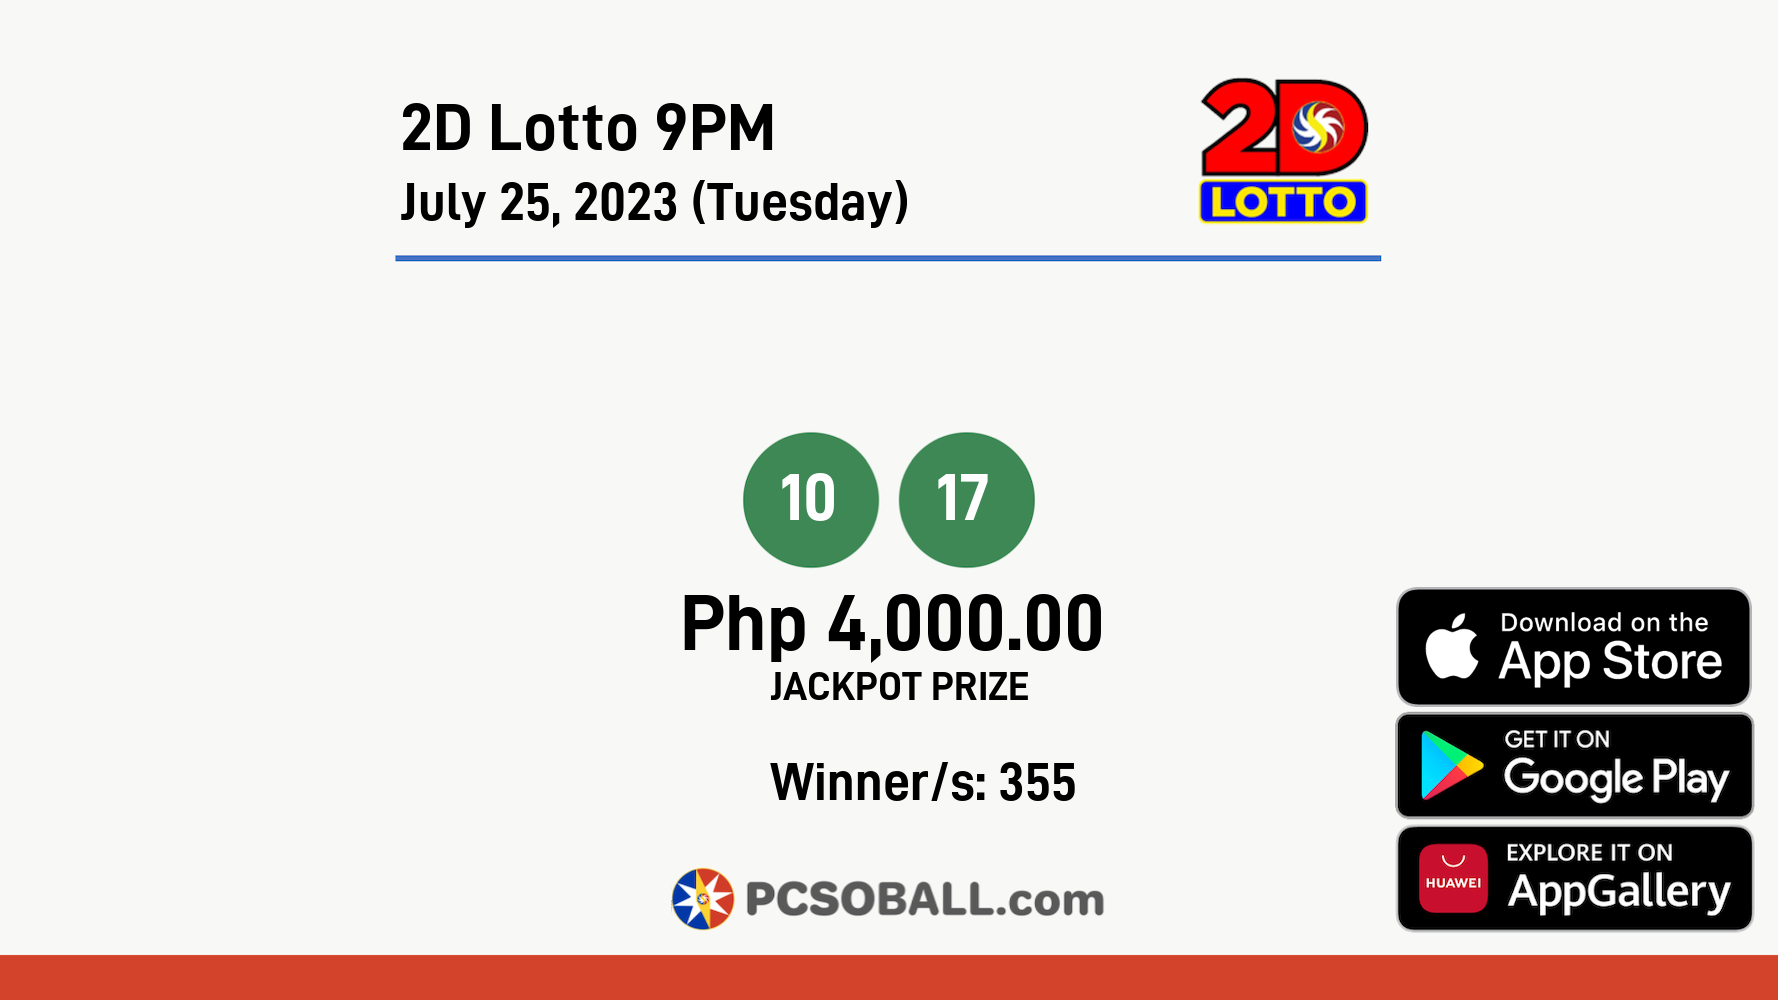 2D Lotto 9PM July 25, 2023 (Tuesday) Result